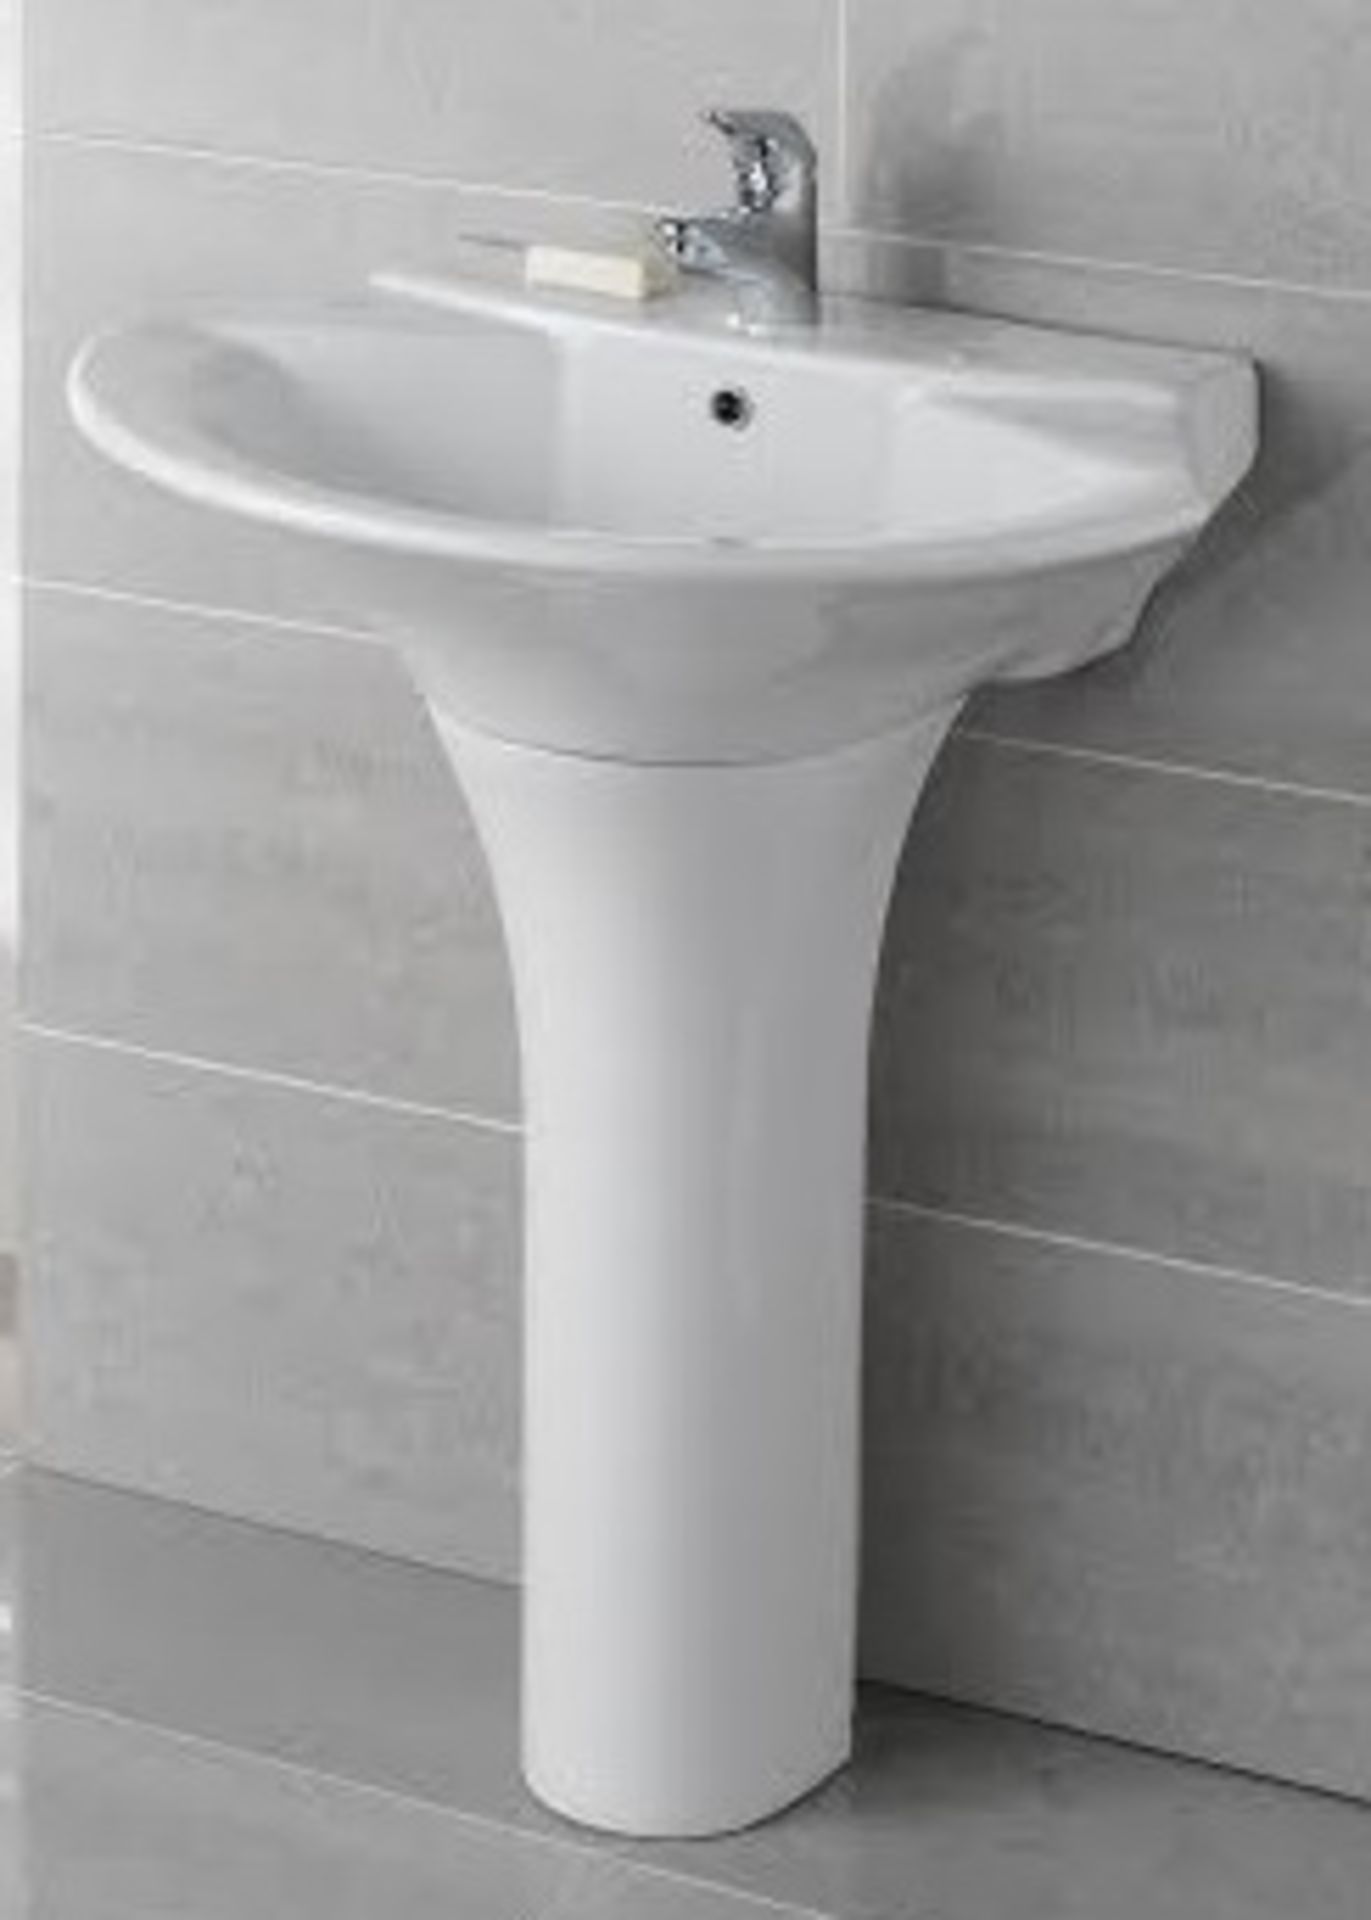 4 x Vogue Bathrooms CLARA Single Tap Hole SINK BASINS With Pedestals - 710mm Width - Product Code